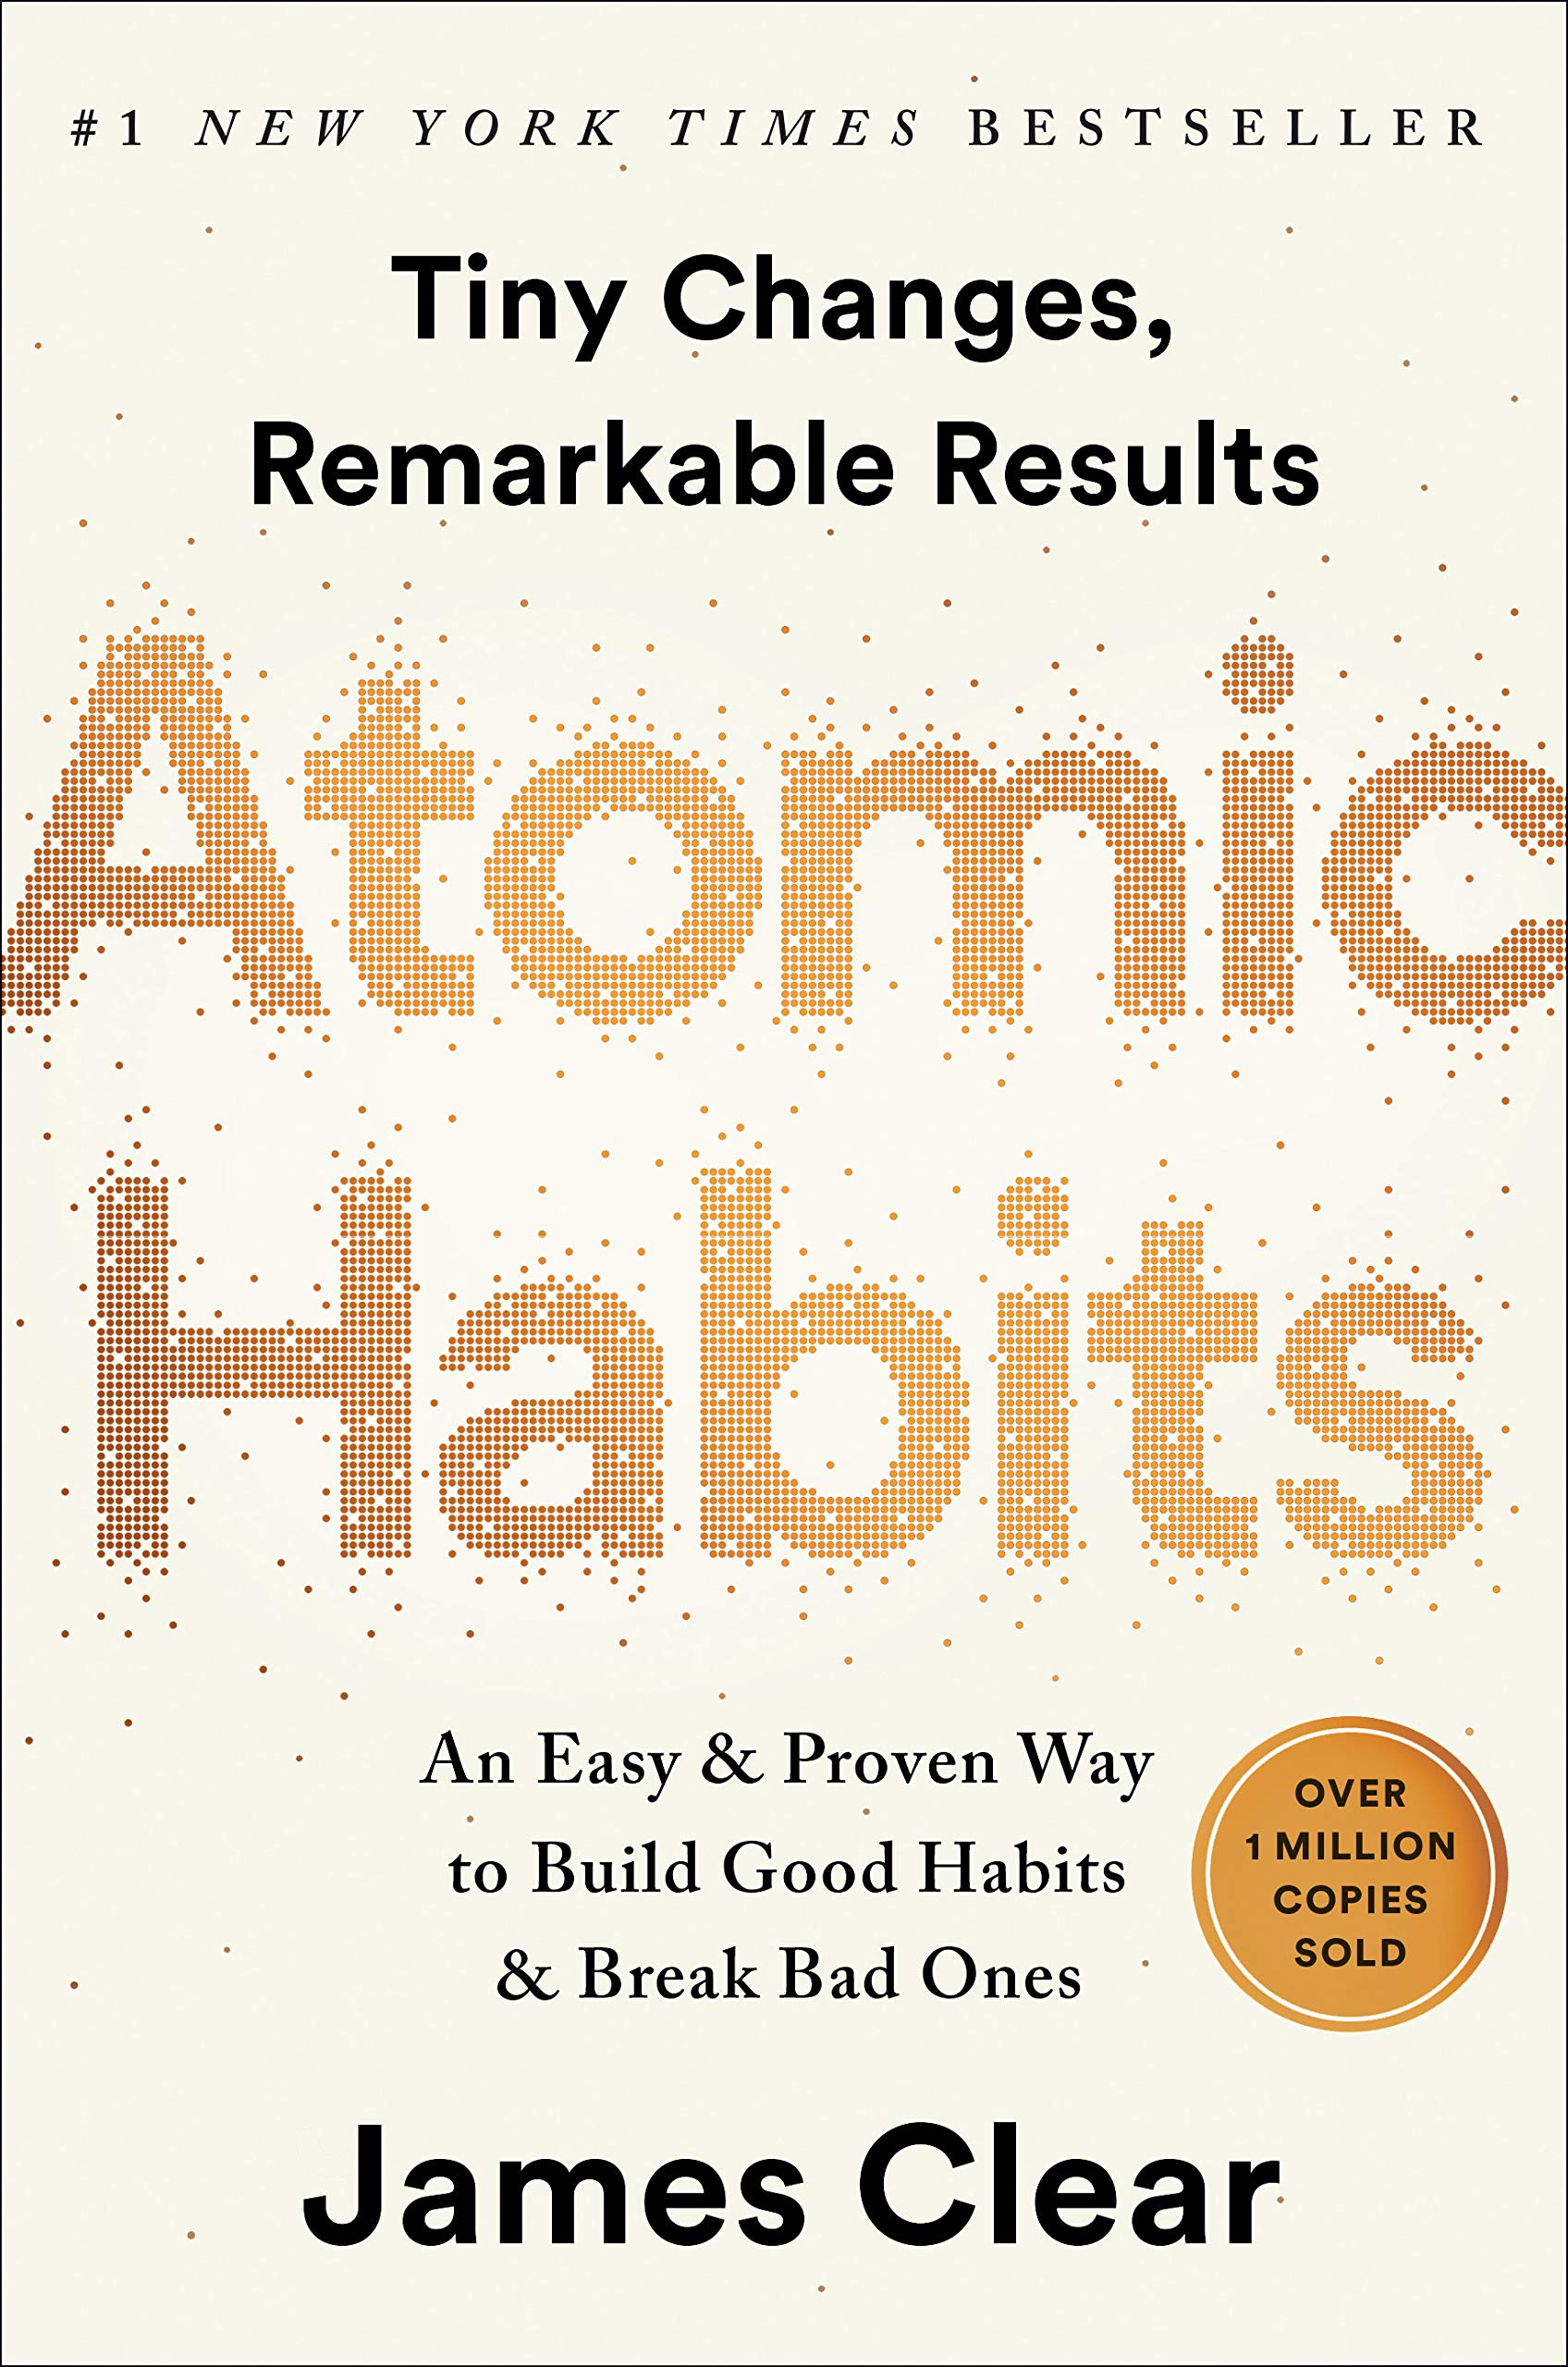 atomic habits and becoming who we want to be, little by little